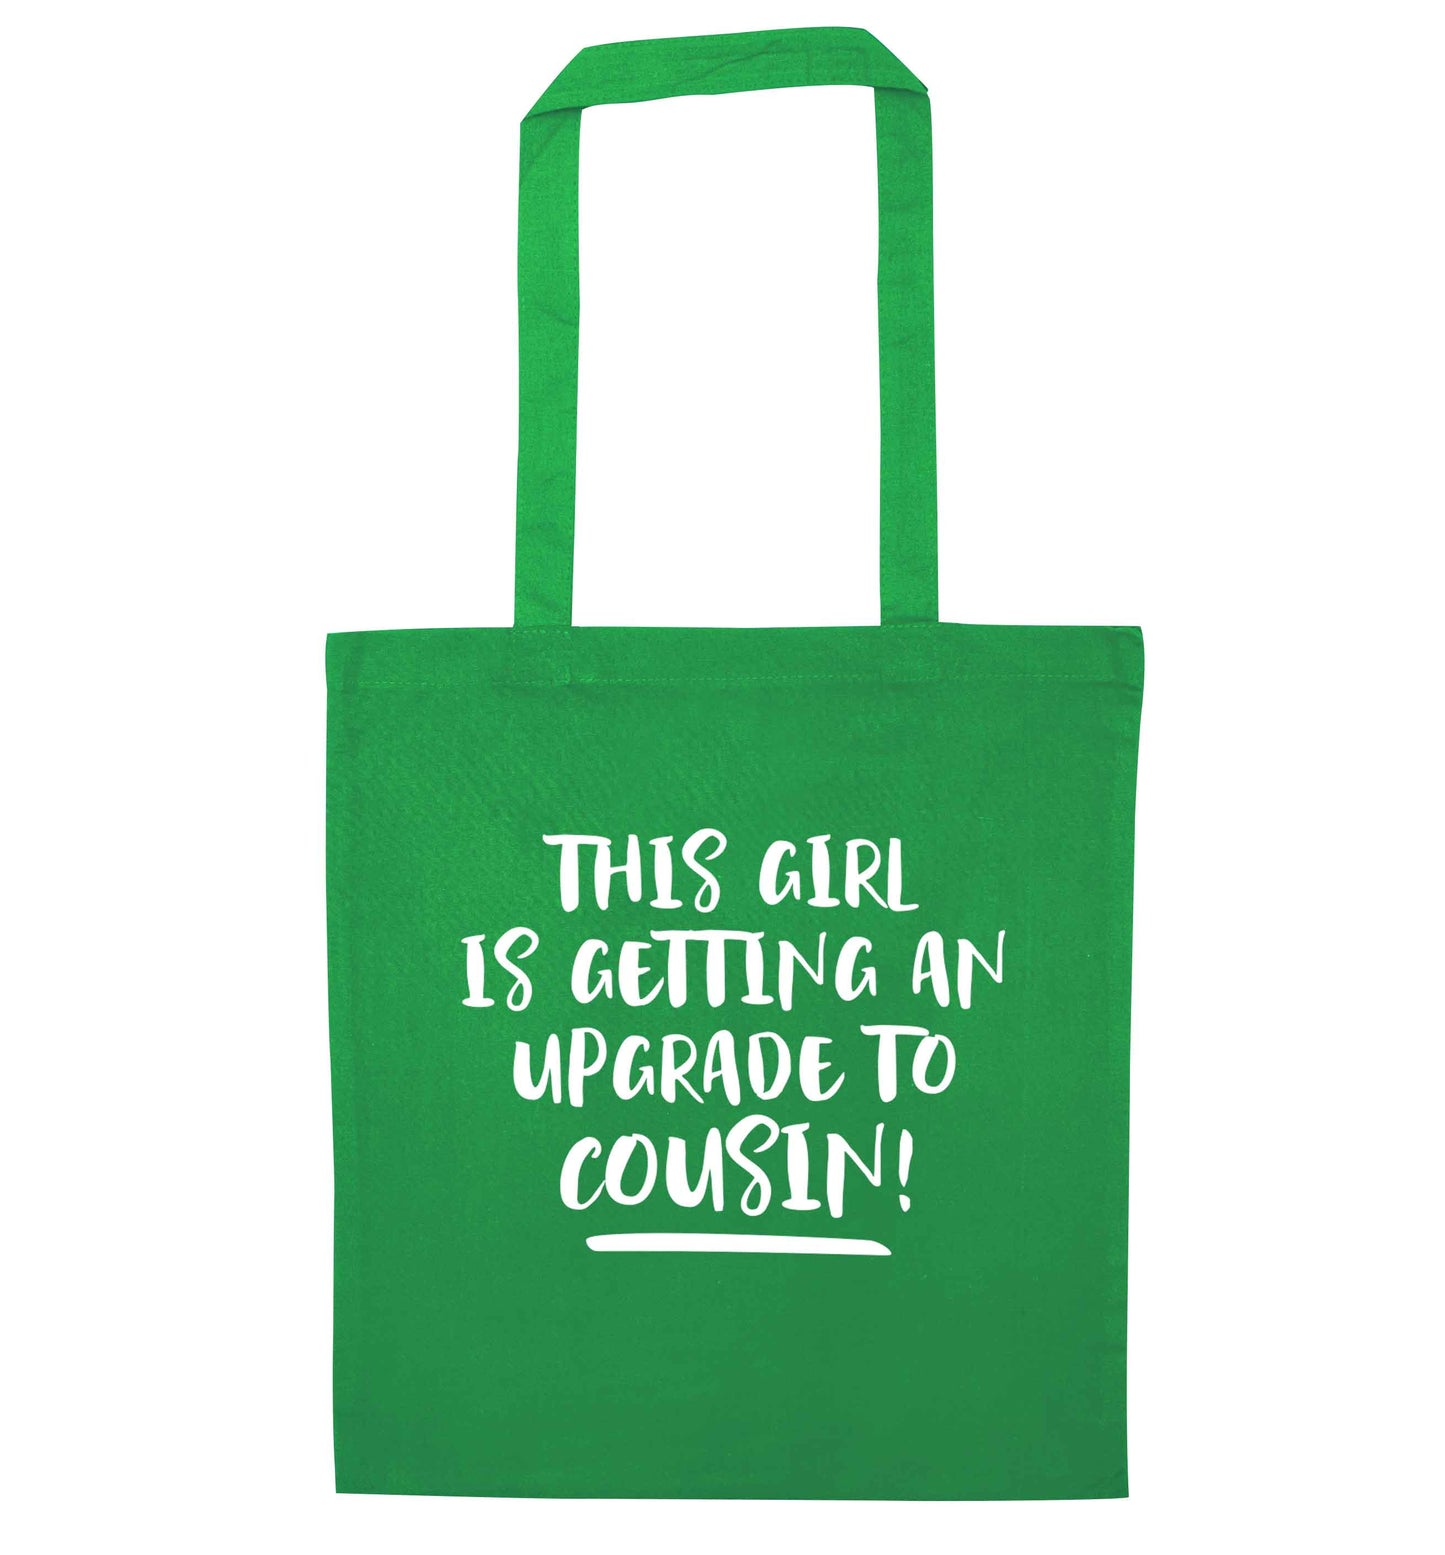 This girl is getting an upgrade to cousin! green tote bag